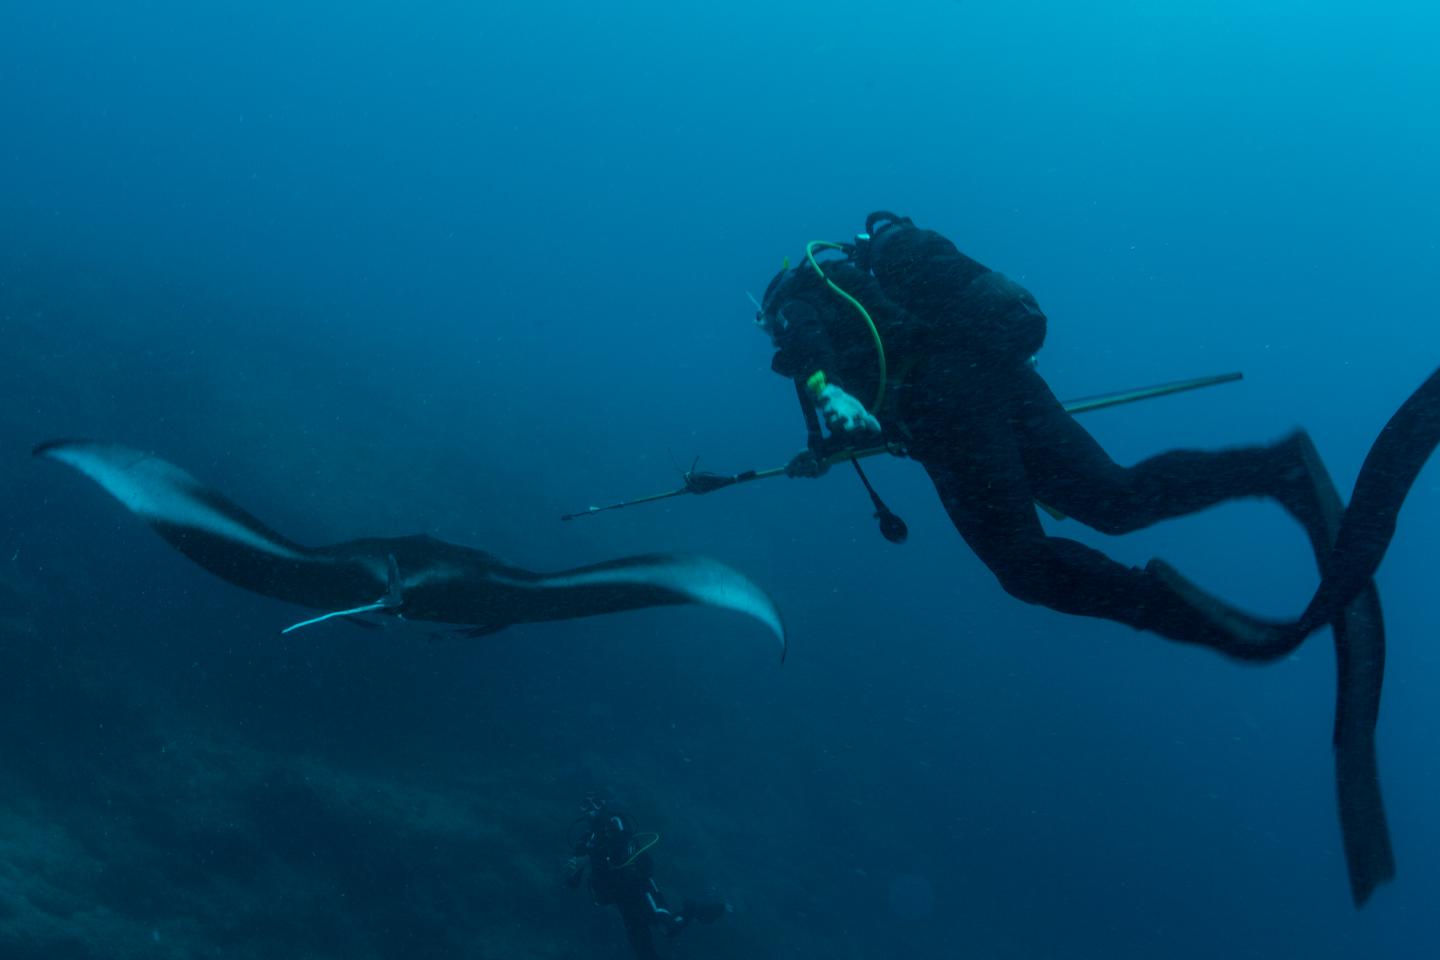 Reef manta rays in New Caledonia dive up to 672 meters deep at night